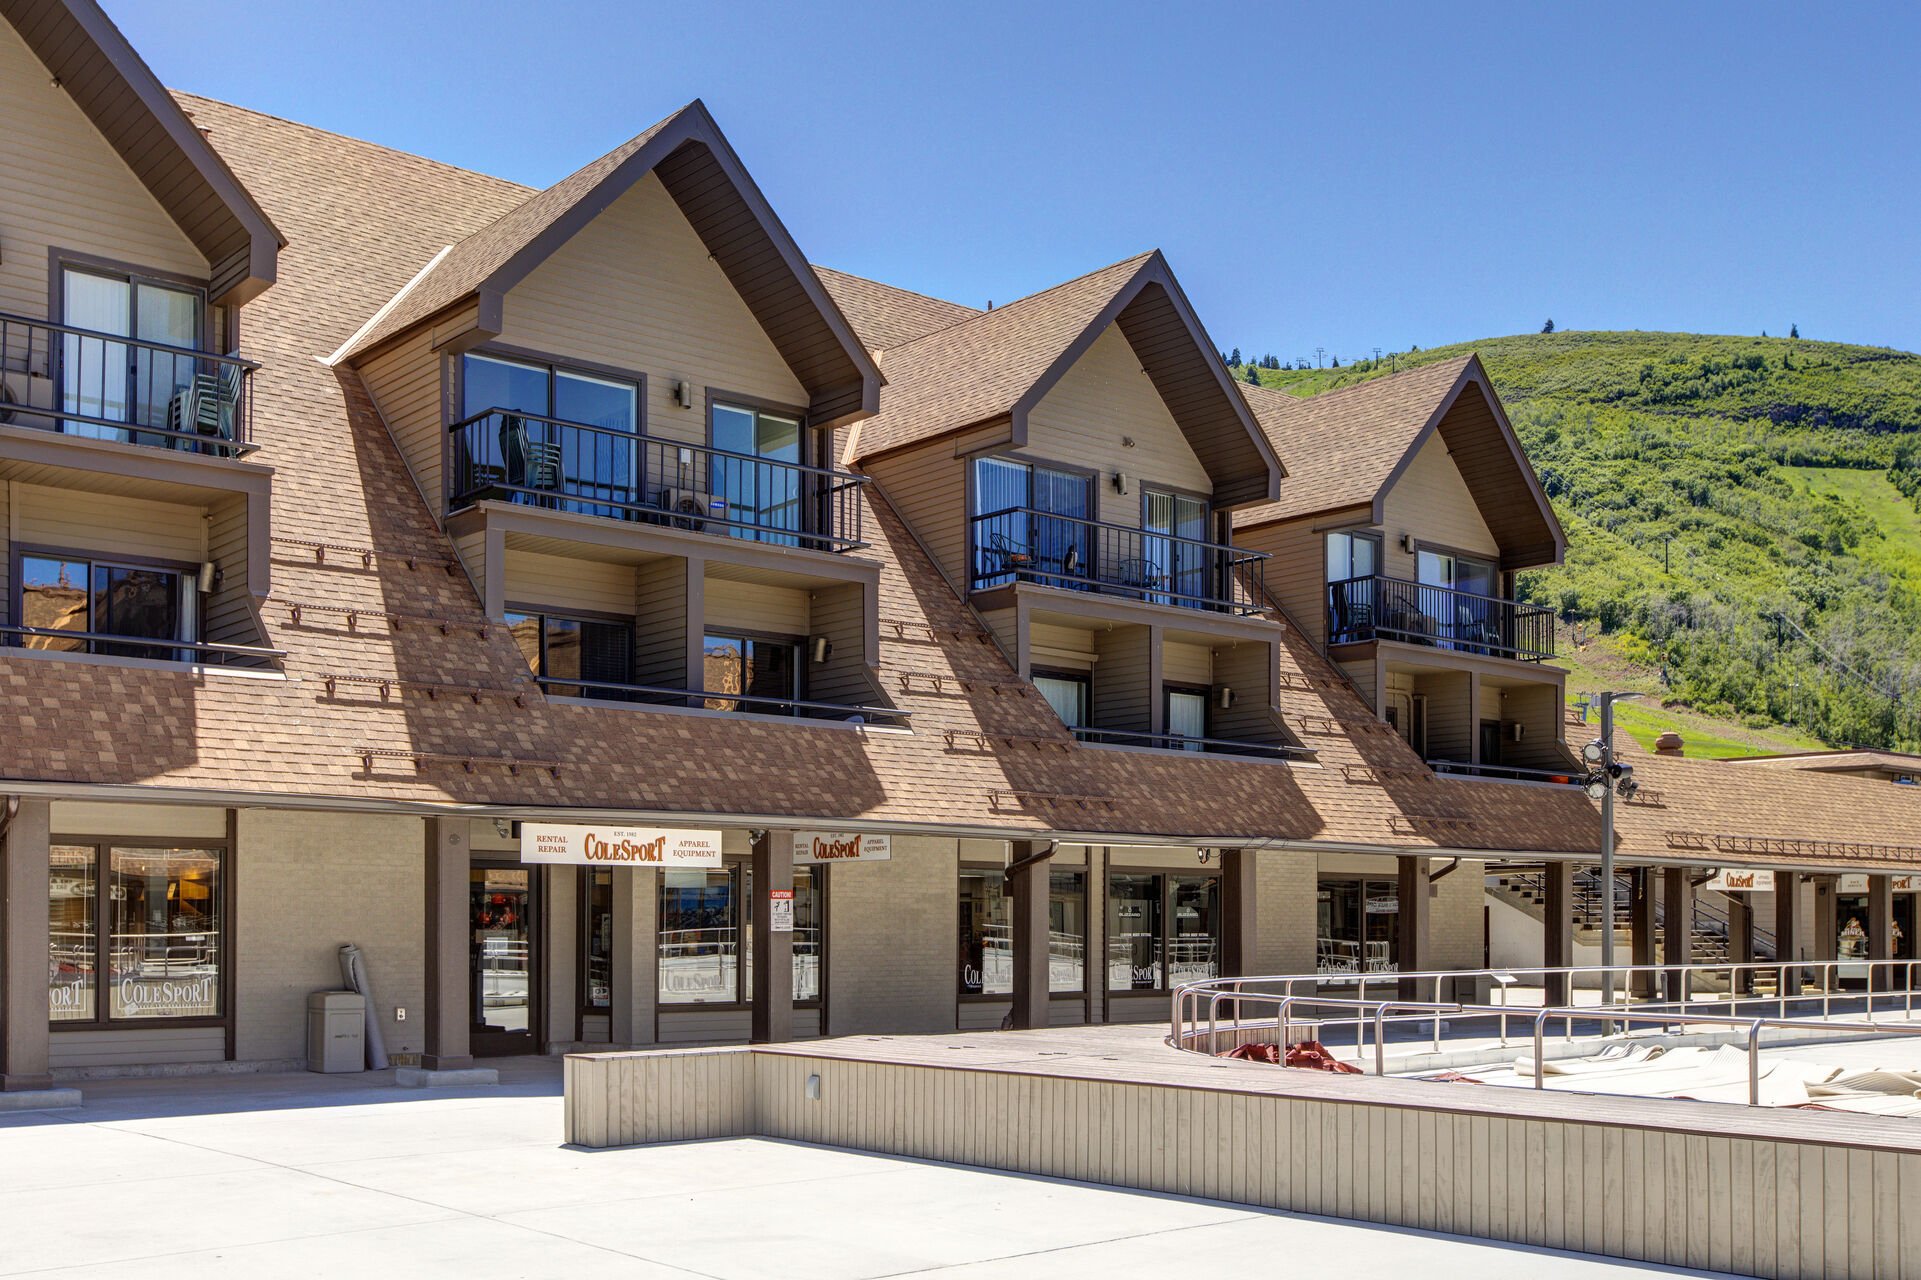 Many Options for Shopping, Dining, and Ski Rentals Right at Park City Mountain Resort